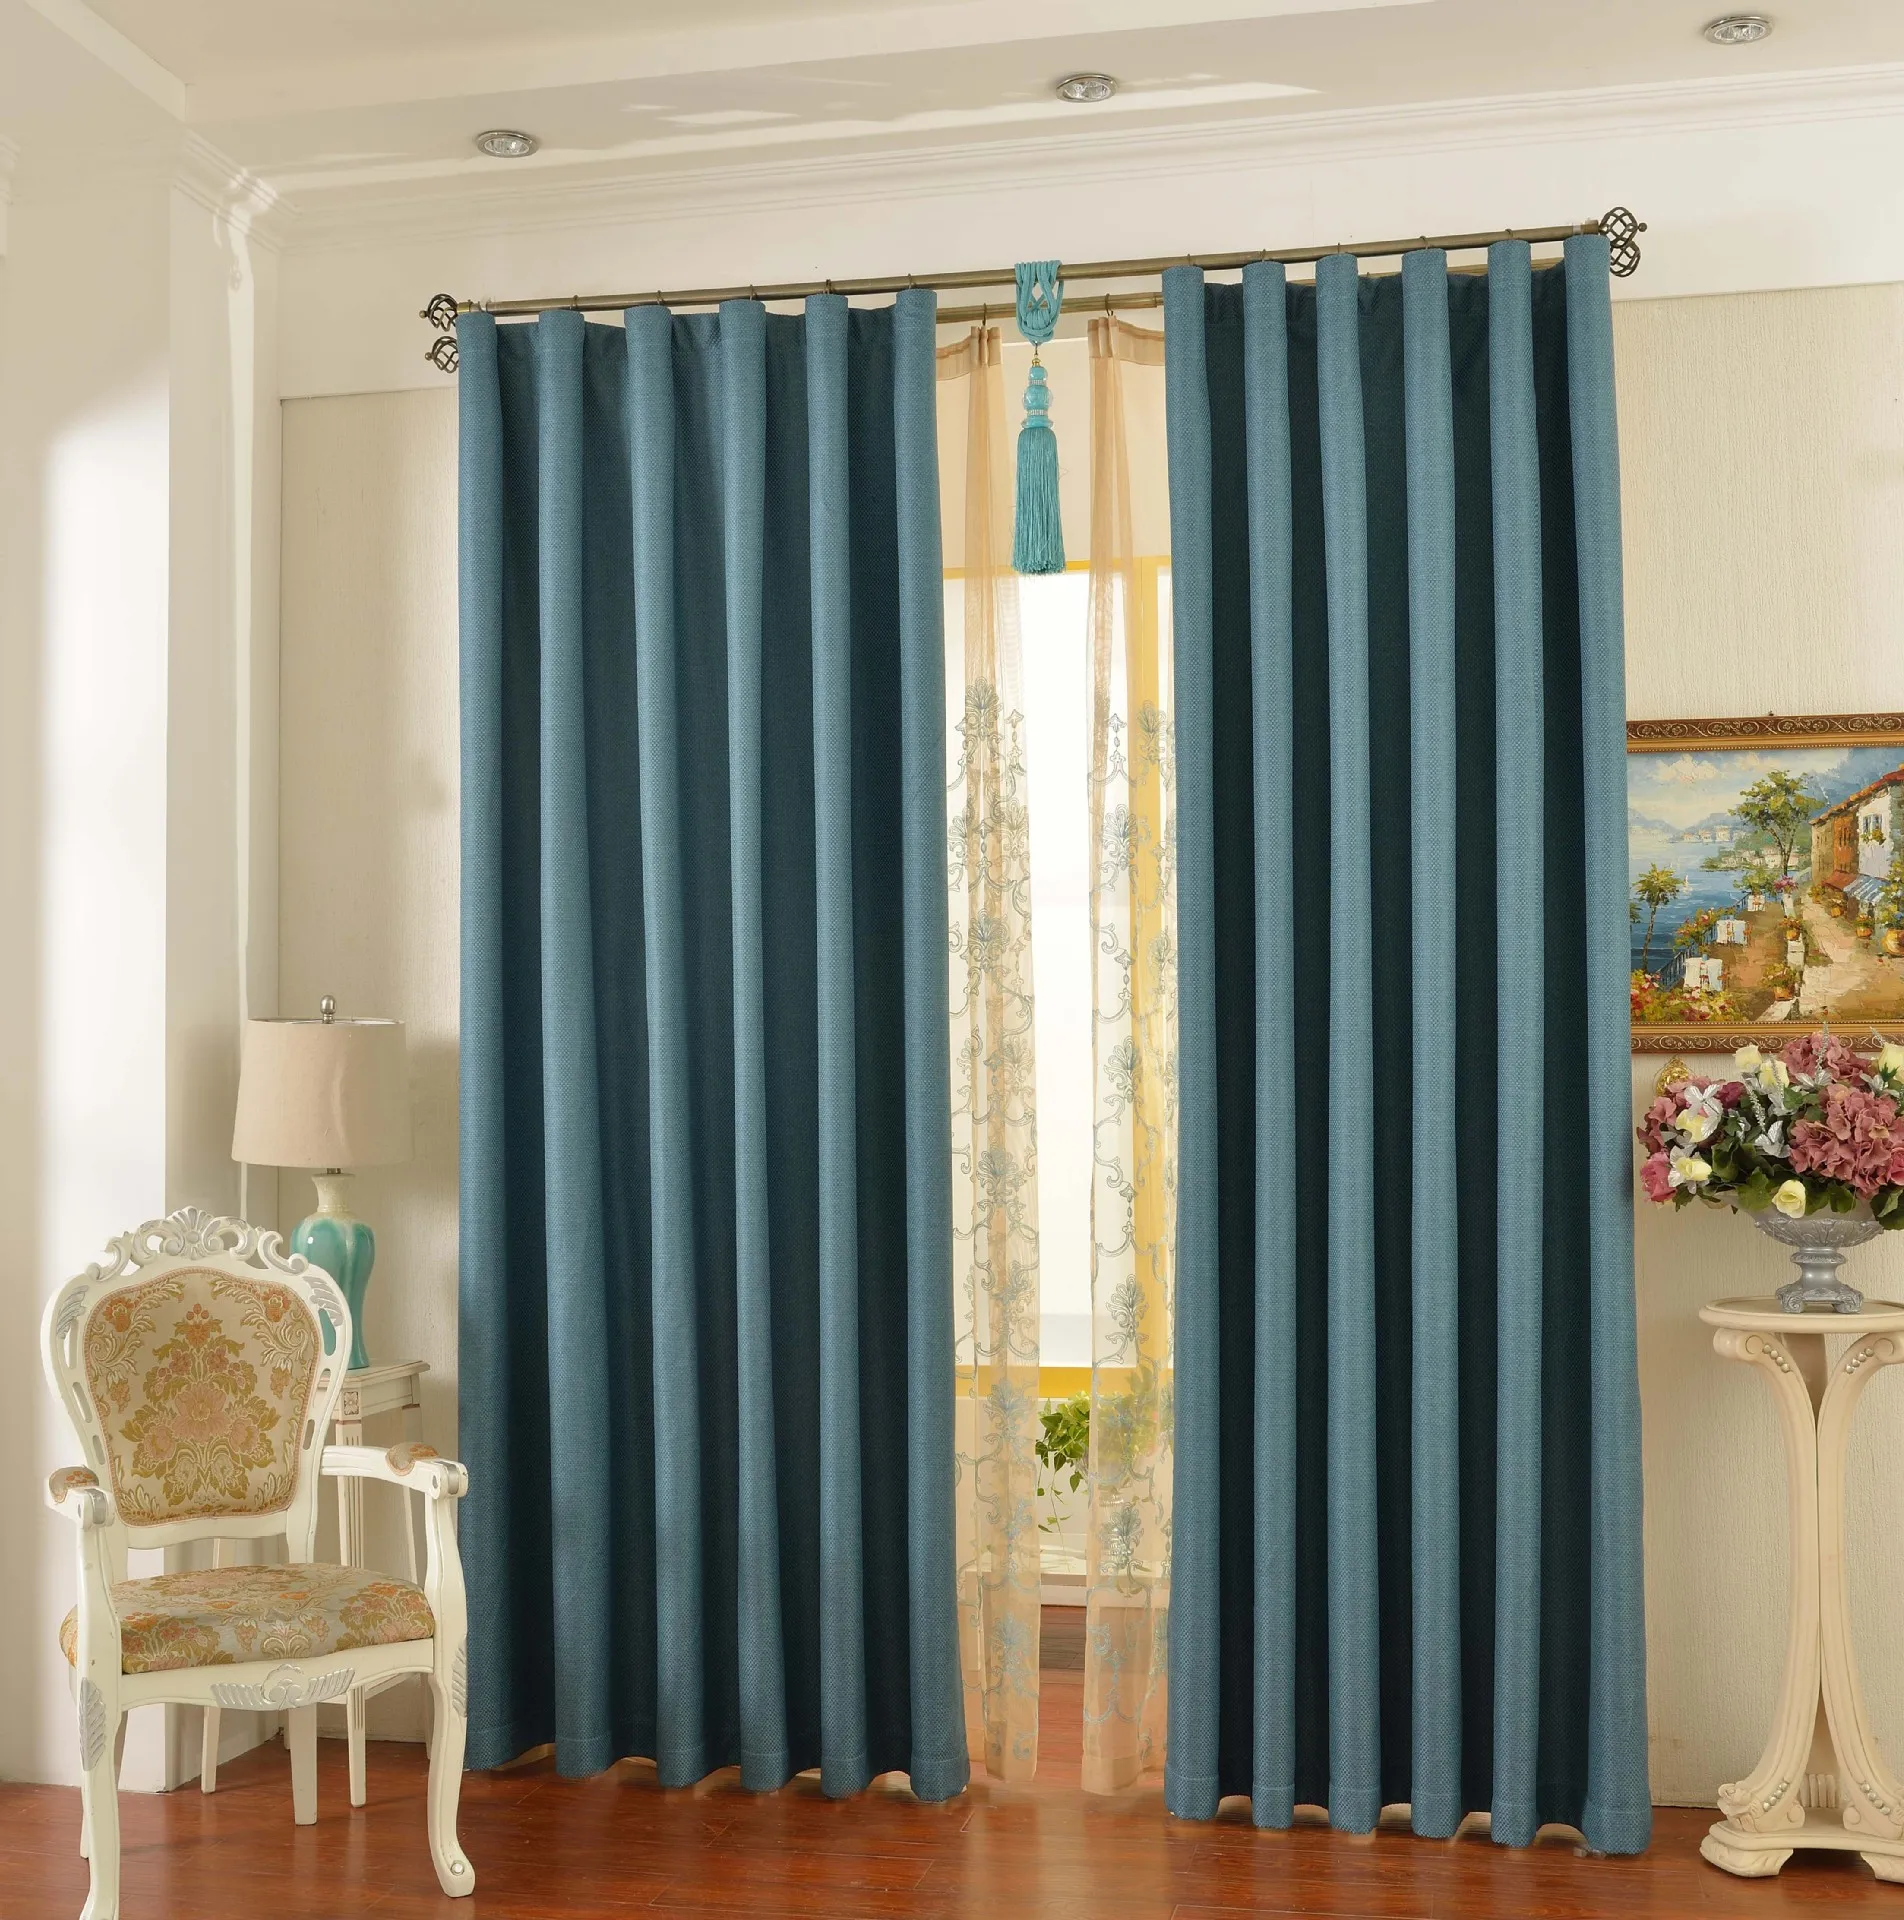 

Hemp Blackout Curtains Finished Linen Curtains Hotel Project Blackout Curtains